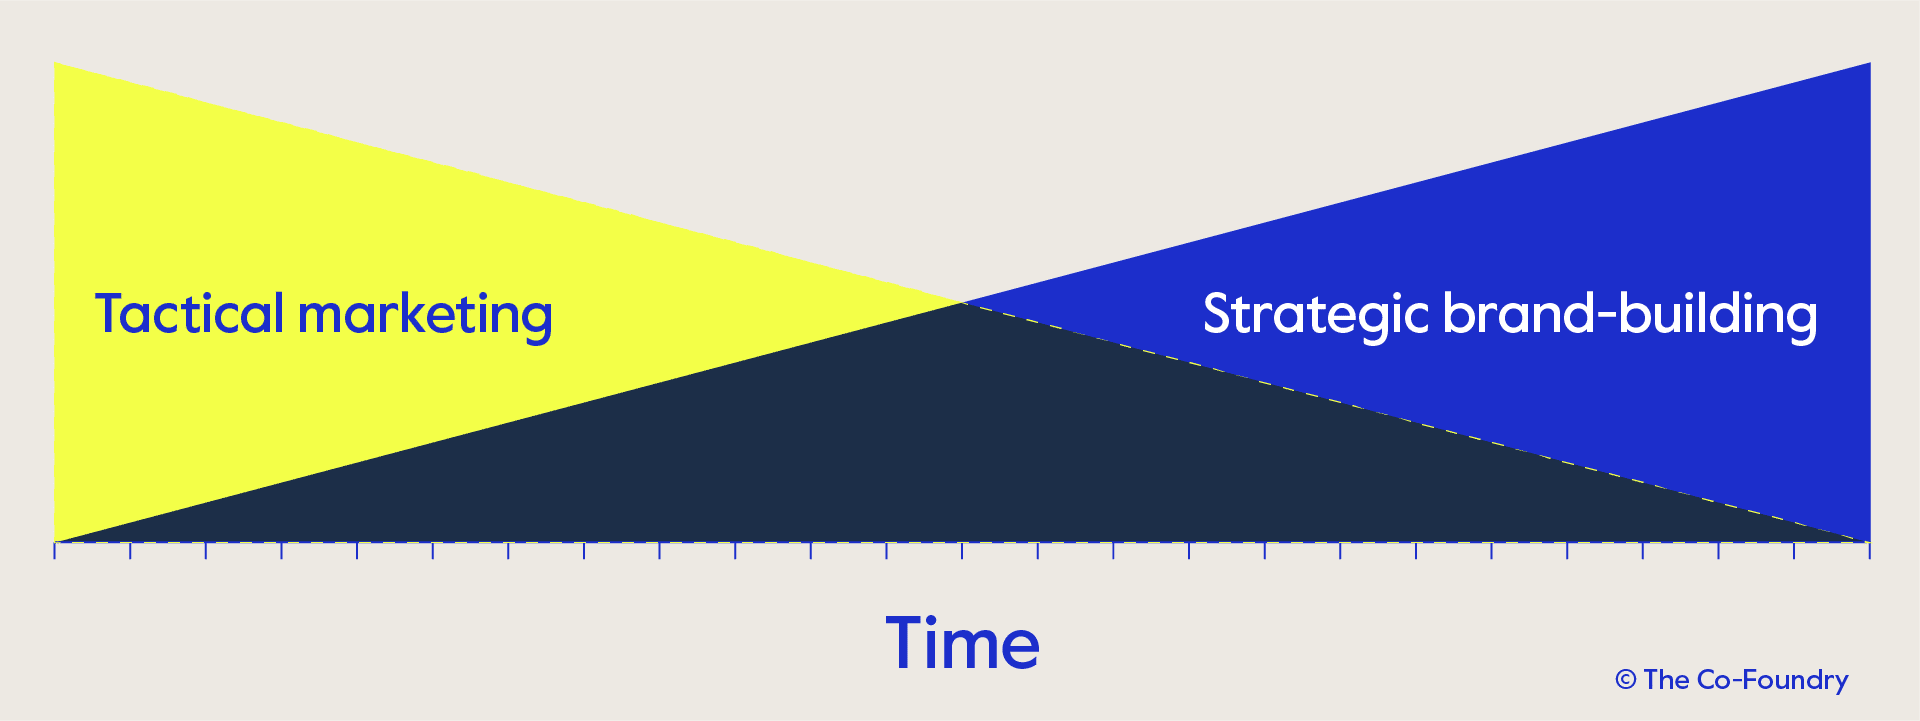 Fig01 Brand-building over time